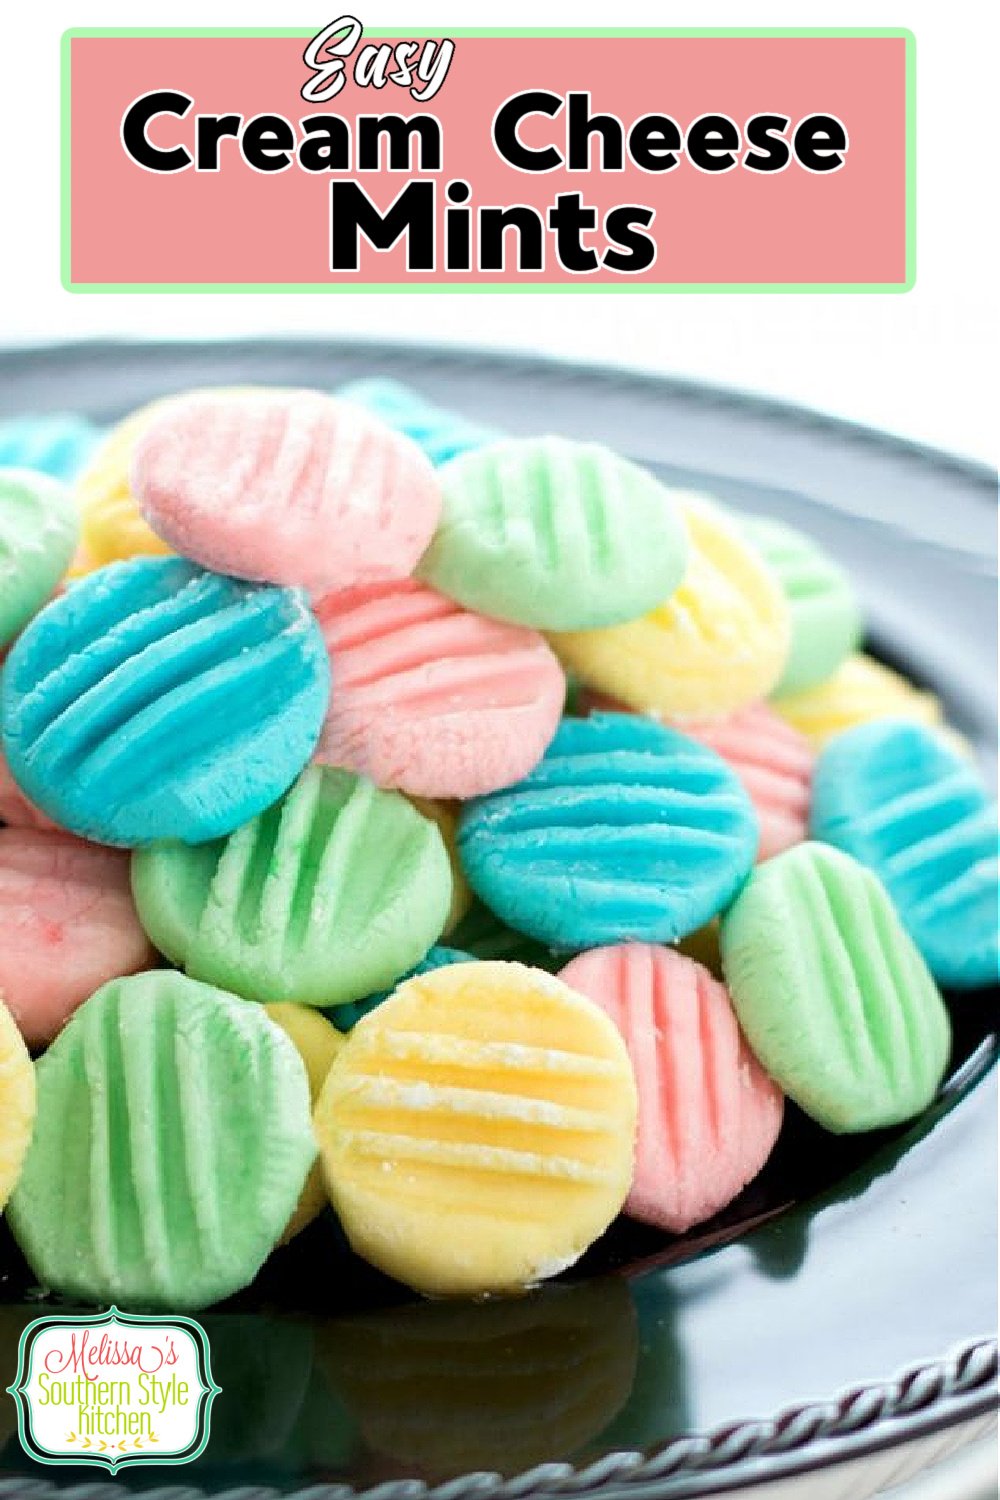 These simple Cream Cheese Mints melt in your mouth #mints #springdesserts #sweets #candy #creamcheesemints #mintrecipes #desserts #easydesserts #easyrecipes